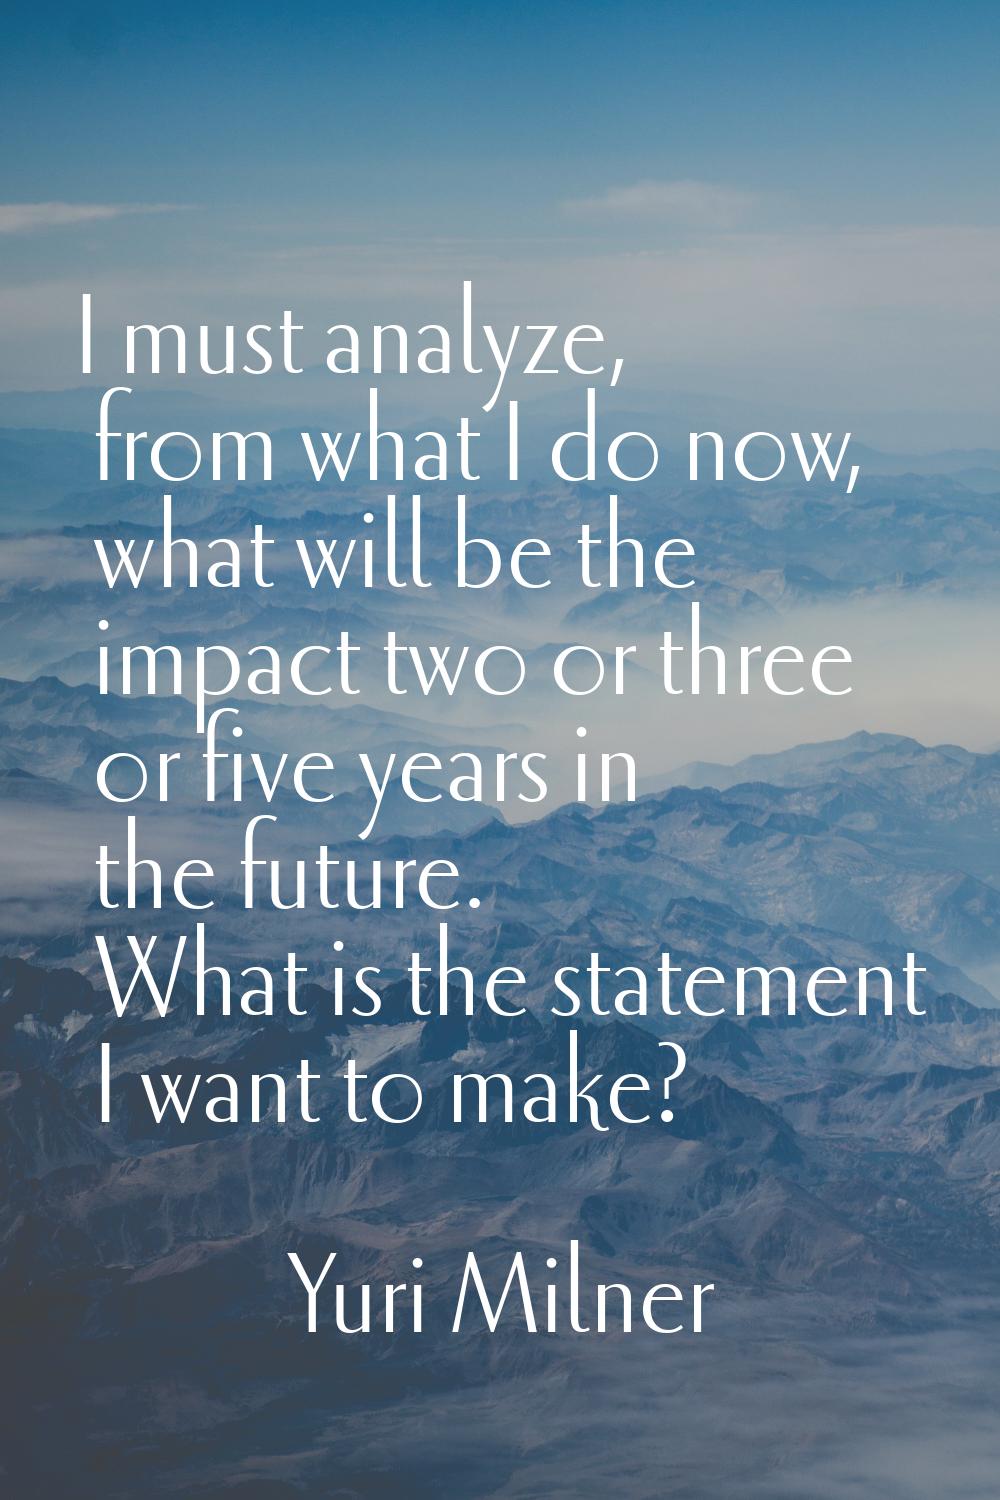 I must analyze, from what I do now, what will be the impact two or three or five years in the futur